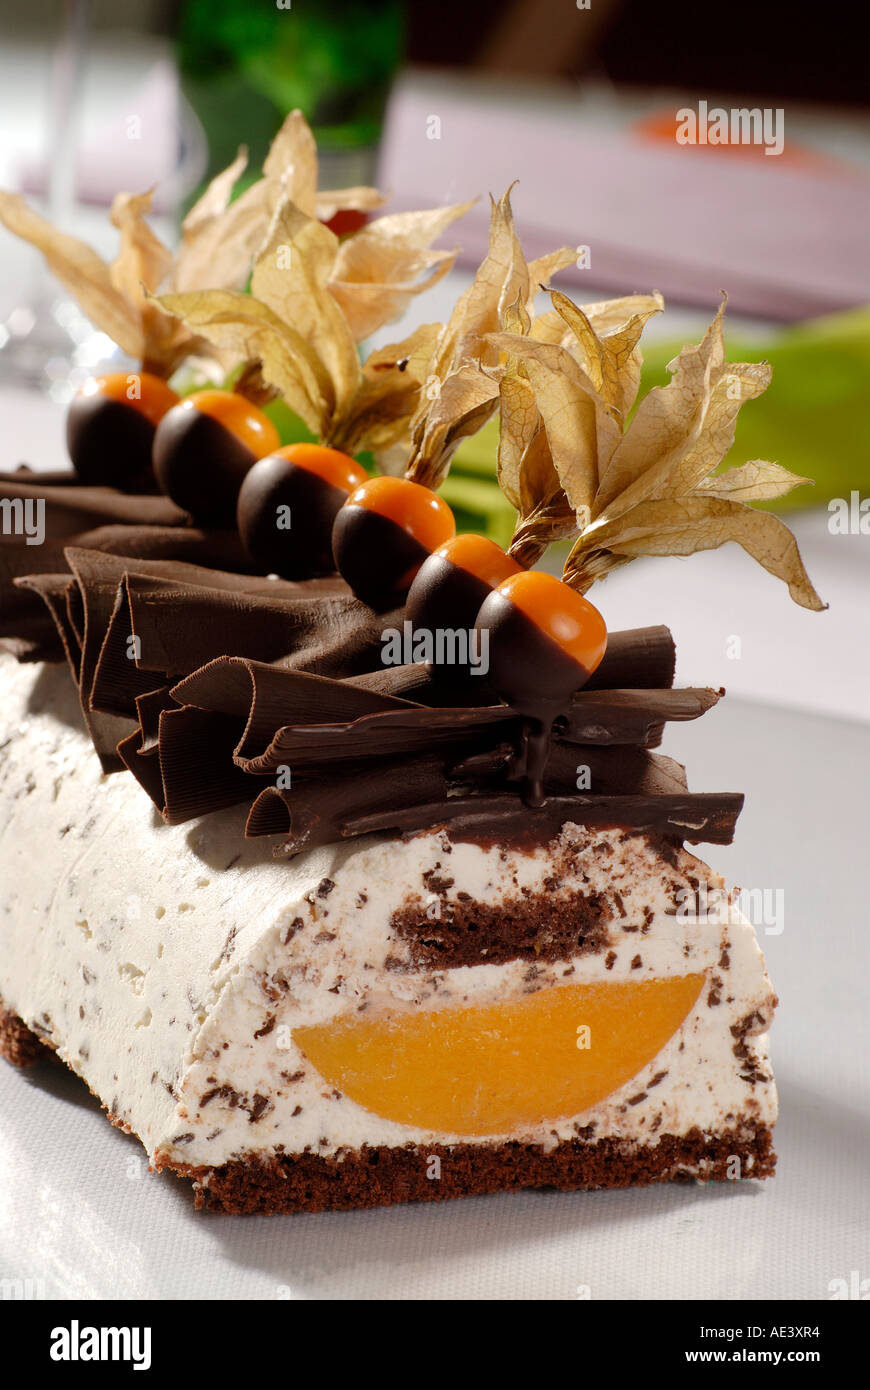 Cream Cake Topped with Chocolate and Physalis Stock Photo